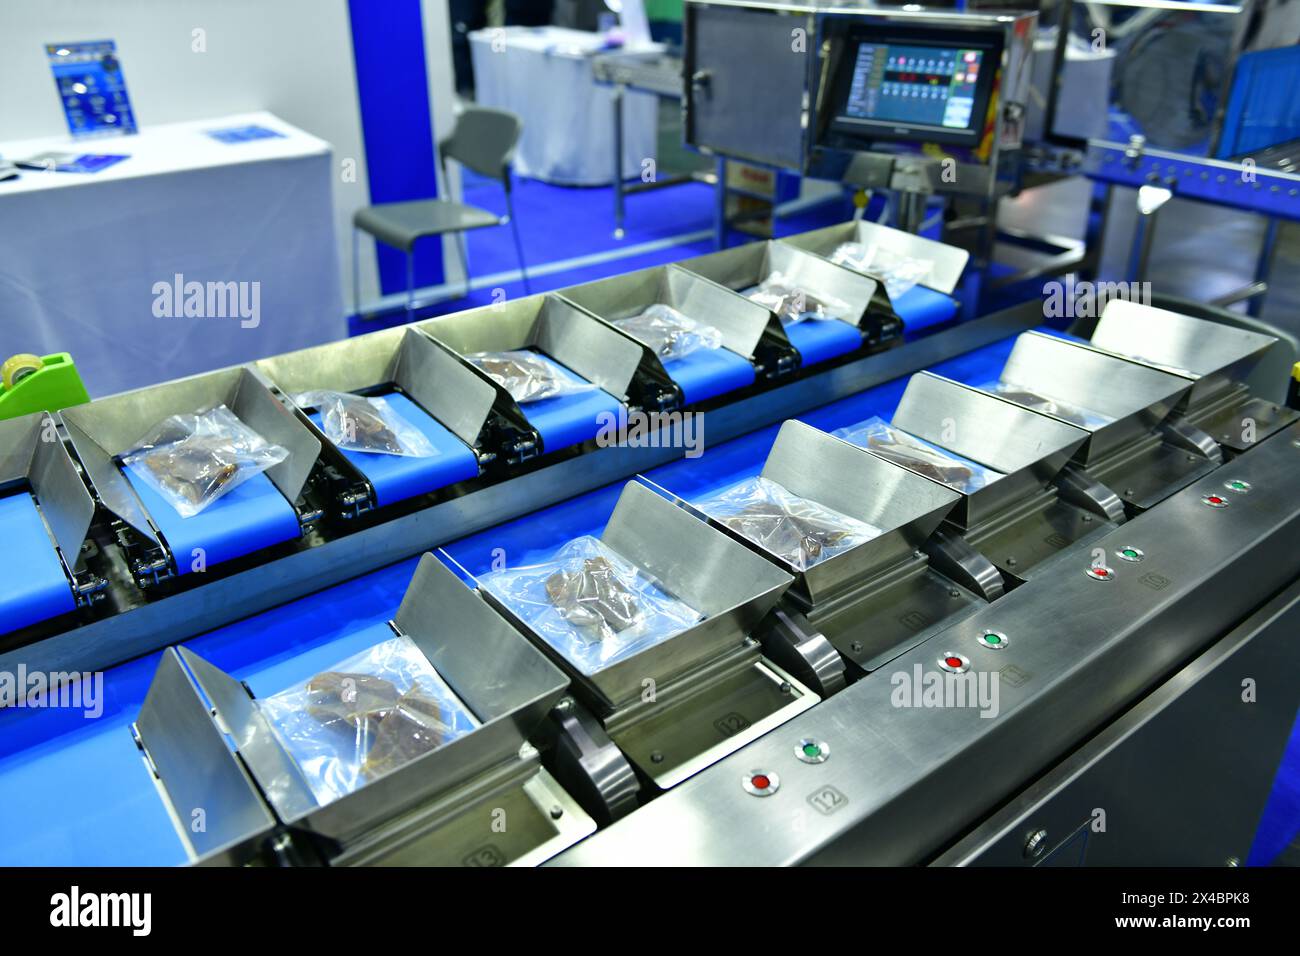 Automatic dried fish meat food production line on conveyor belt equipment machinery in factory Stock Photo